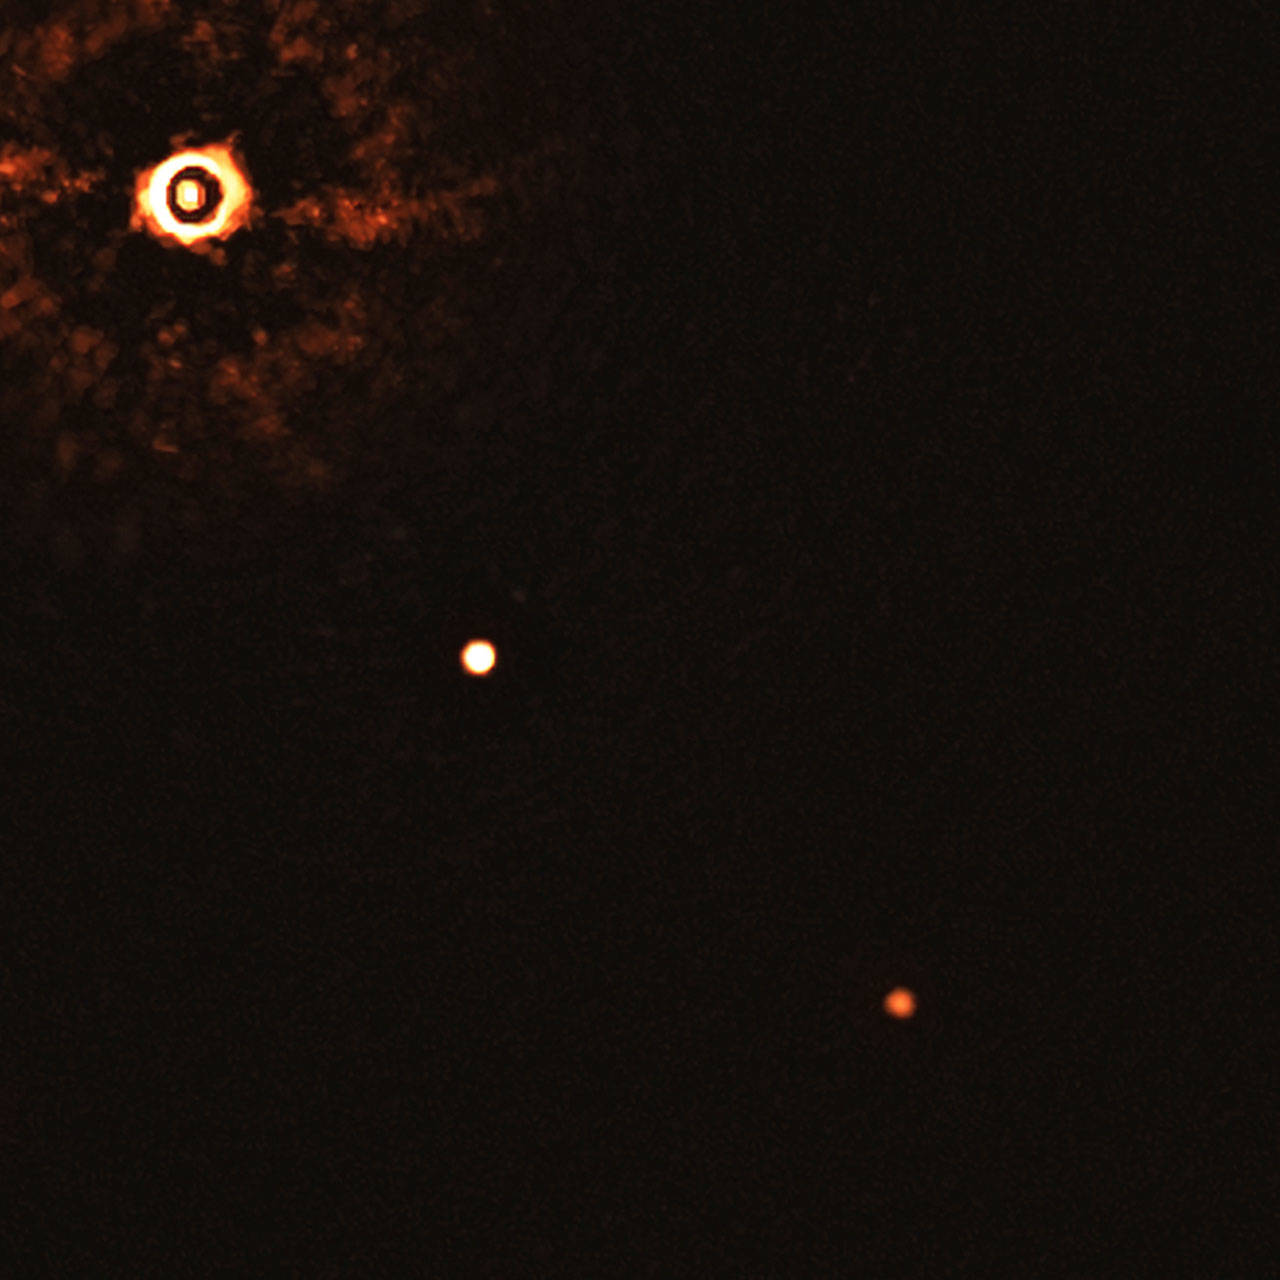 This image made available by the European Southern Observatory in July 2020 shows the star TYC 8998-760-1, upper left, and two giant exoplanets. The image was captured by blocking the light from the young, Sun-like star, allowing for the fainter planets to be detected. The system is about 300 light-years away from Earth. (Bohn et al./ESO via AP)